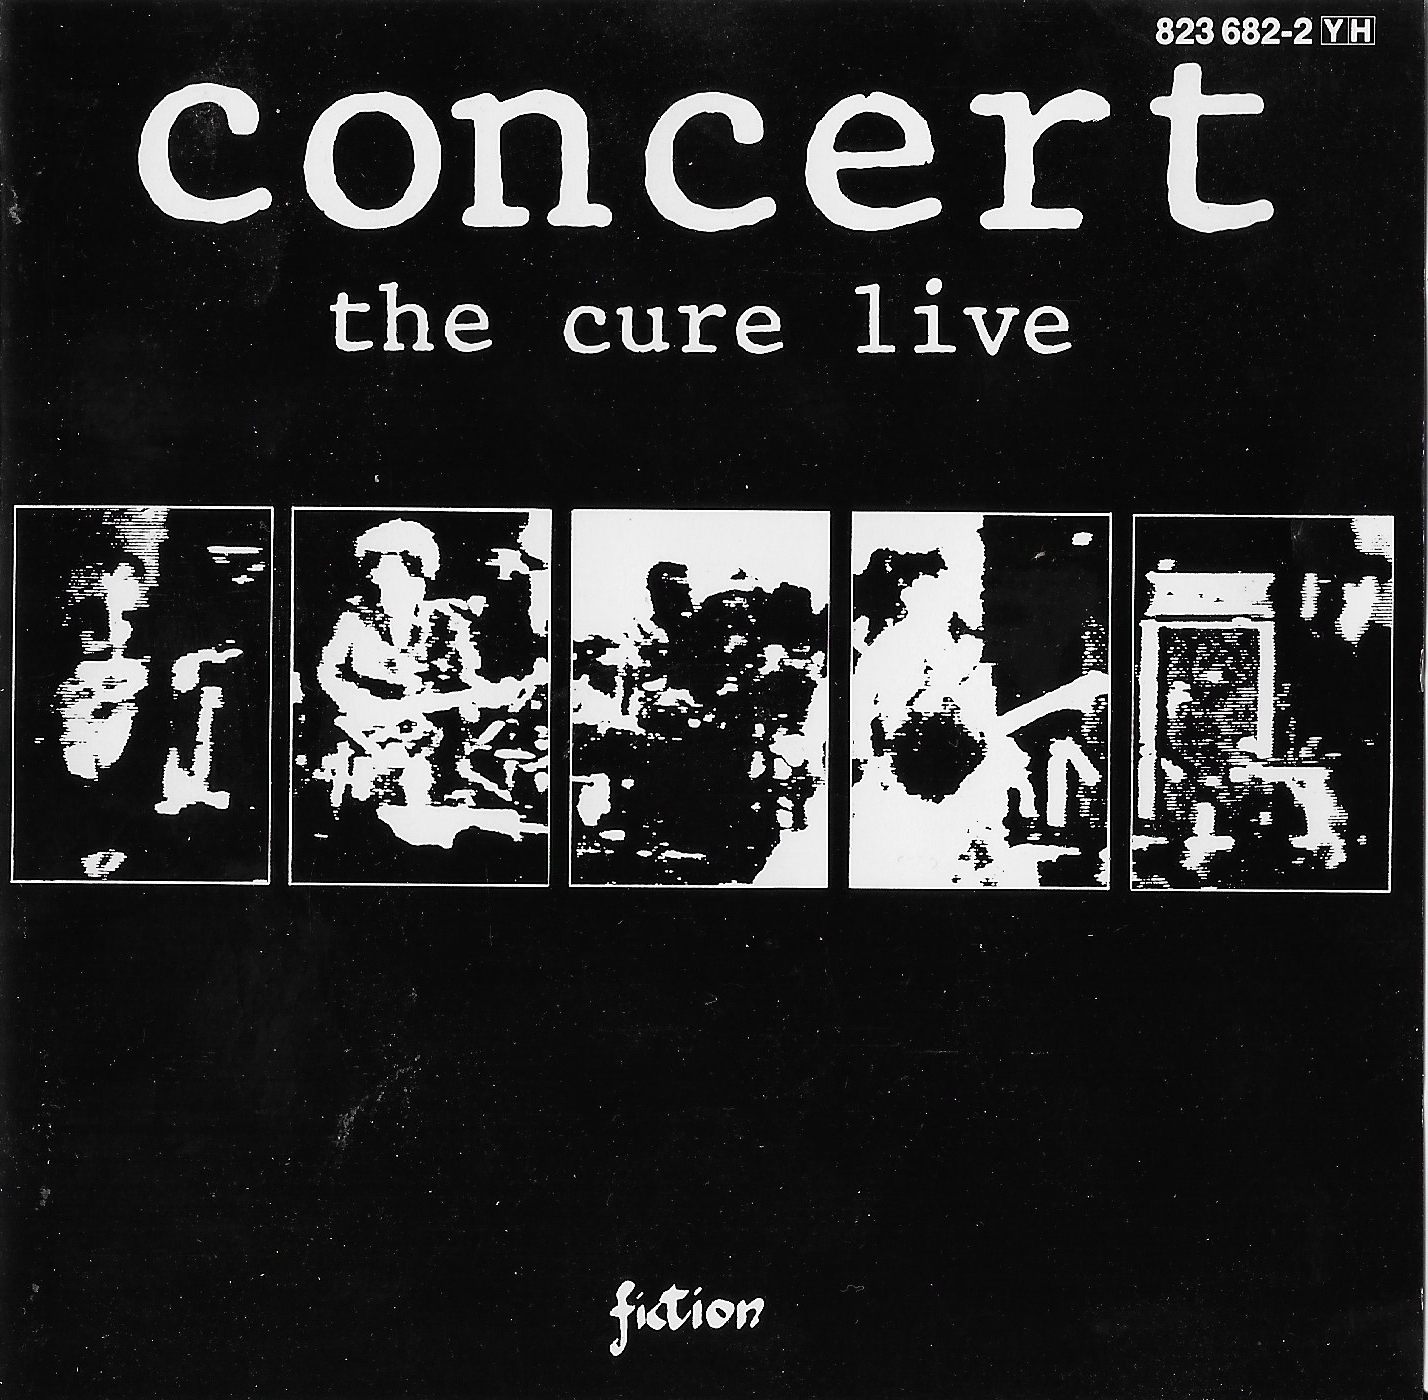 Picture of 823682 - 2 Concert - The Cure live by artist The Cure